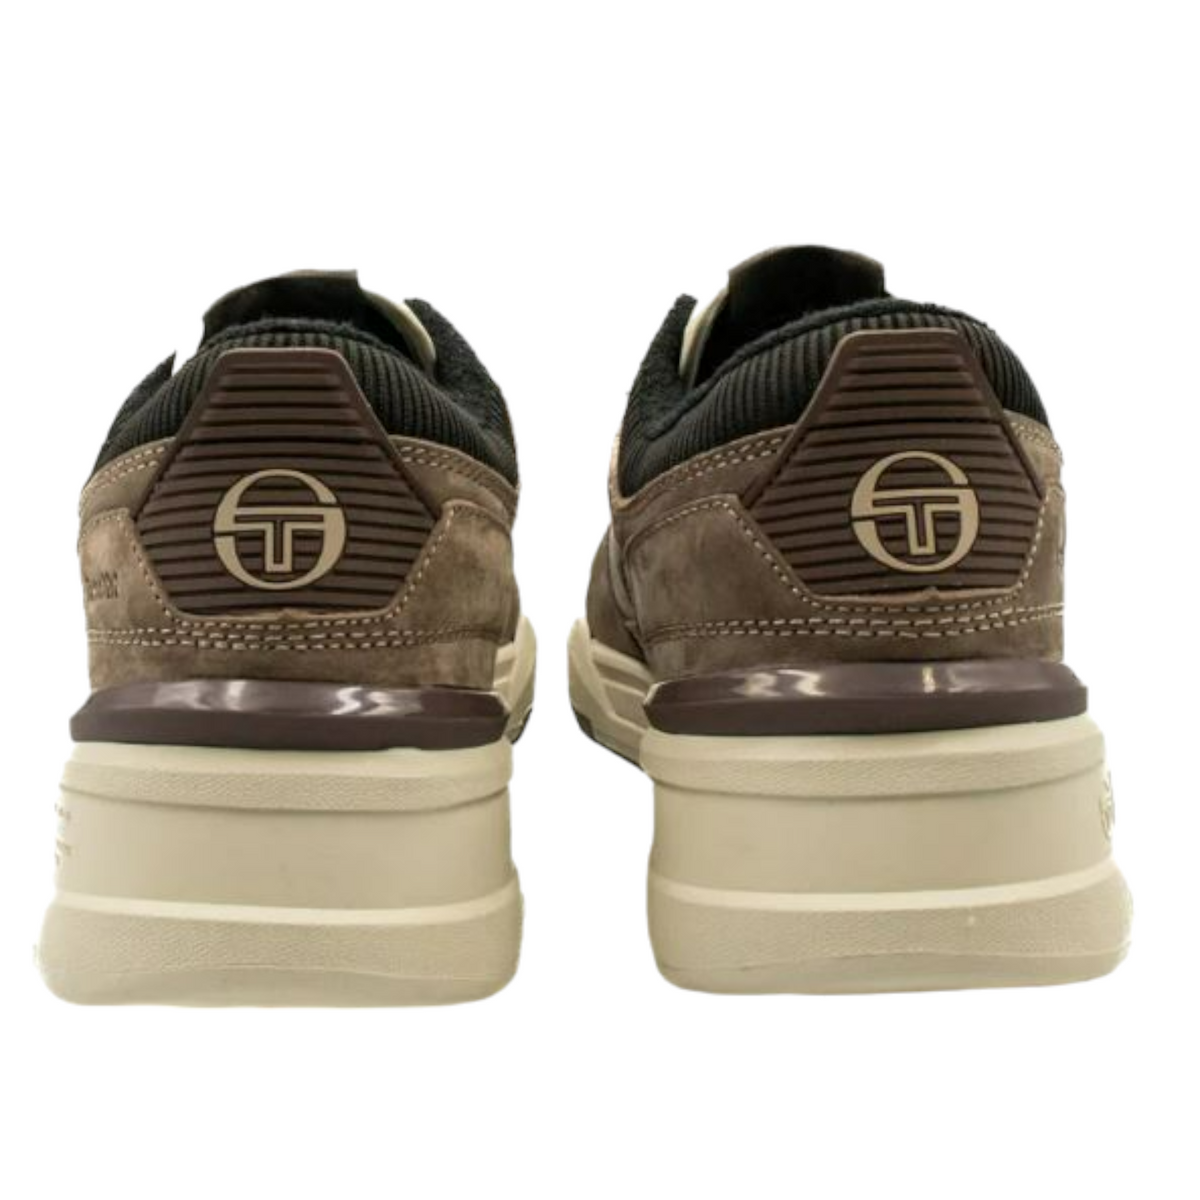 Sergio Tacchini BB Court Low Trainers Brown